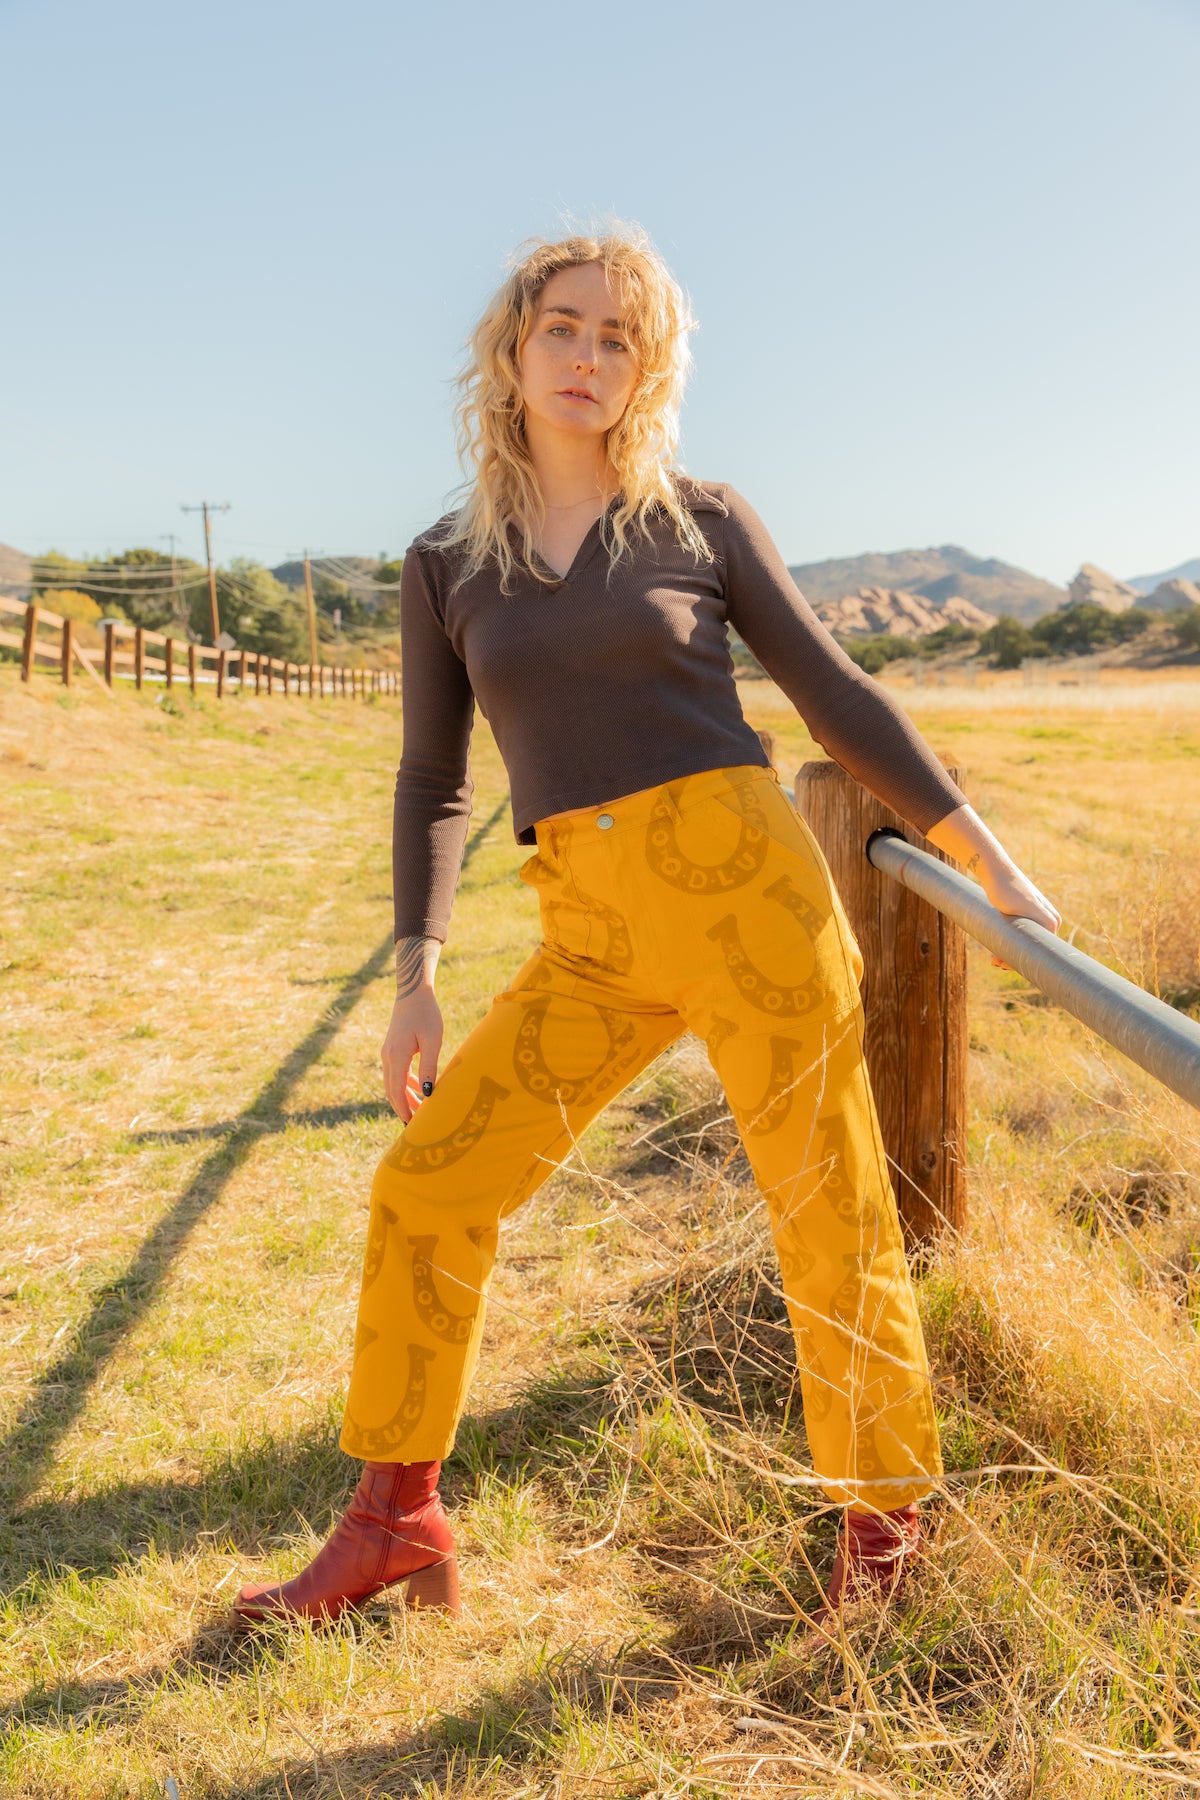 Ada is wearing Long Sleeve Fisherman Polo in Espresso Brown and Icon Work Pants in Golden Horseshoes